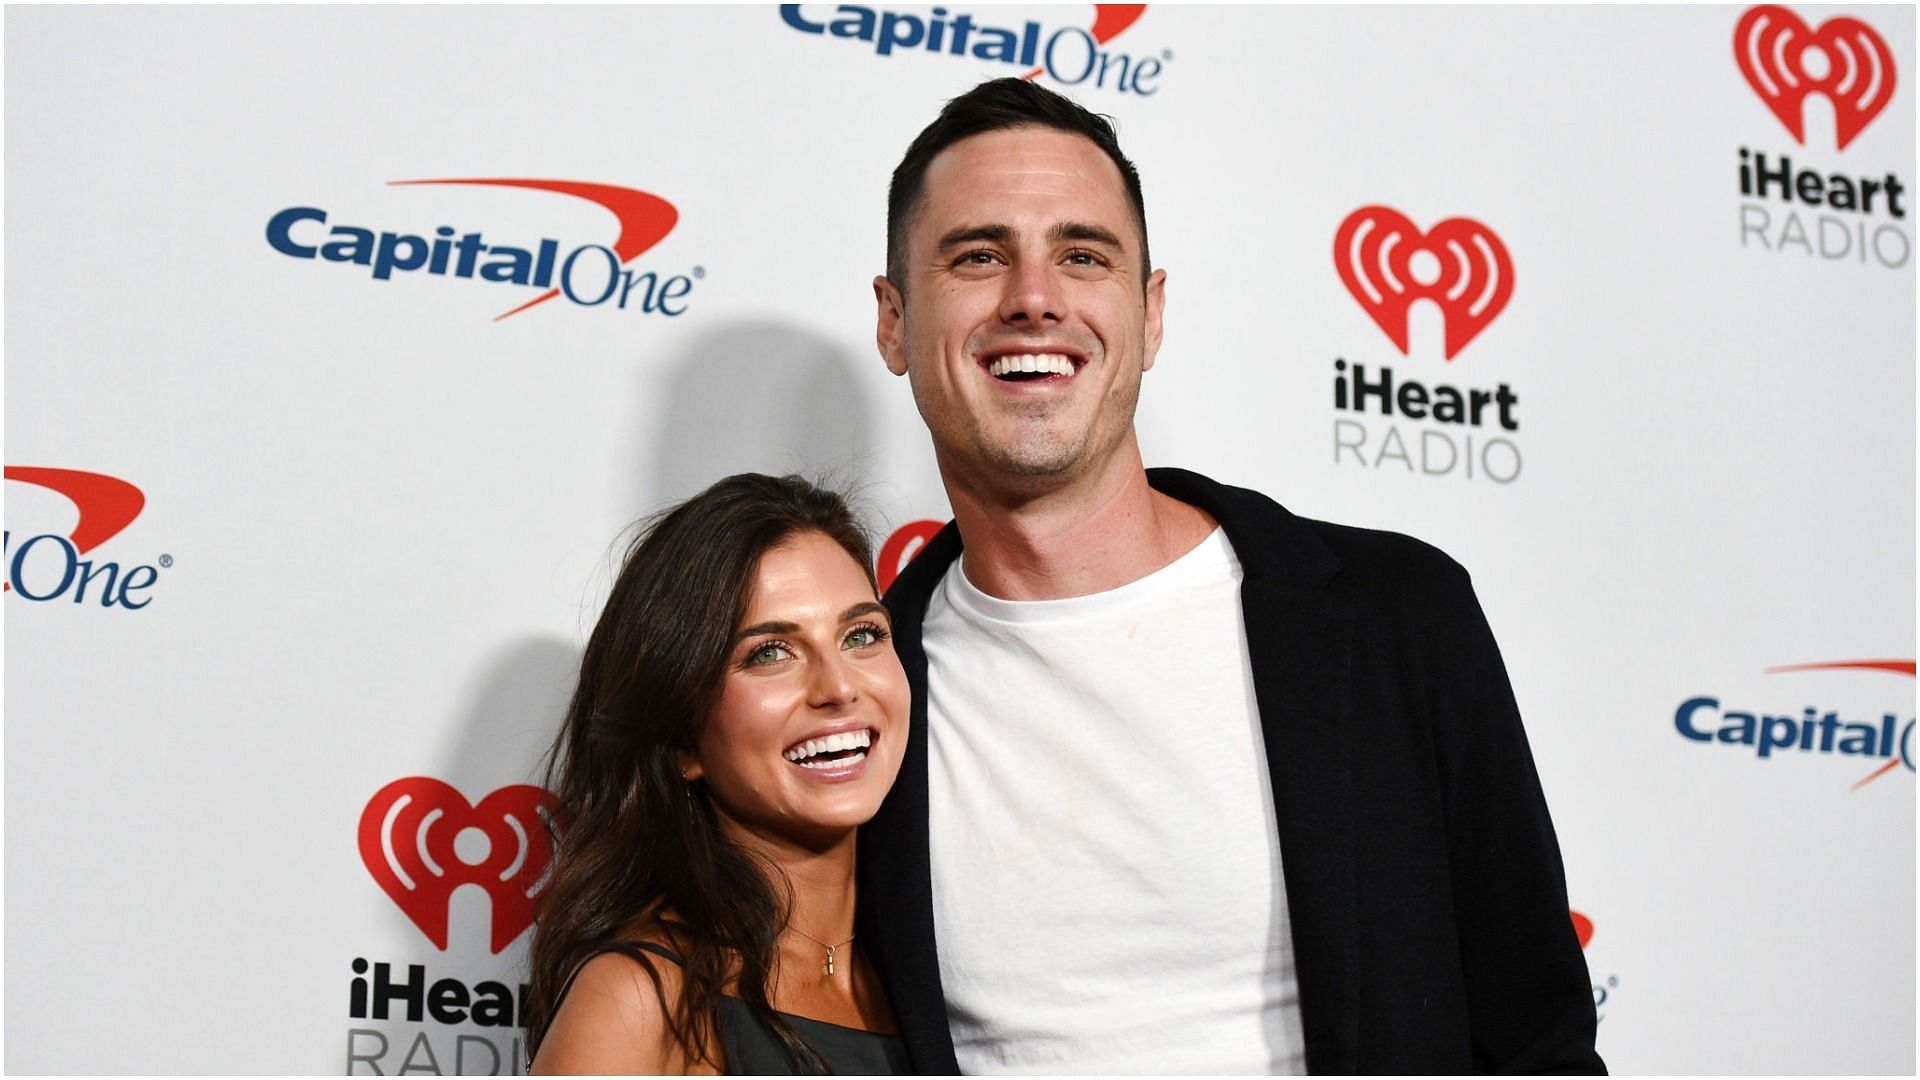 Jessica Clarke and Ben Higgins attend the 2019 iHeartRadio Music Festival at T-Mobile Arena on September 20, 2019, in Las Vegas, Nevada (Image via Getty Images)